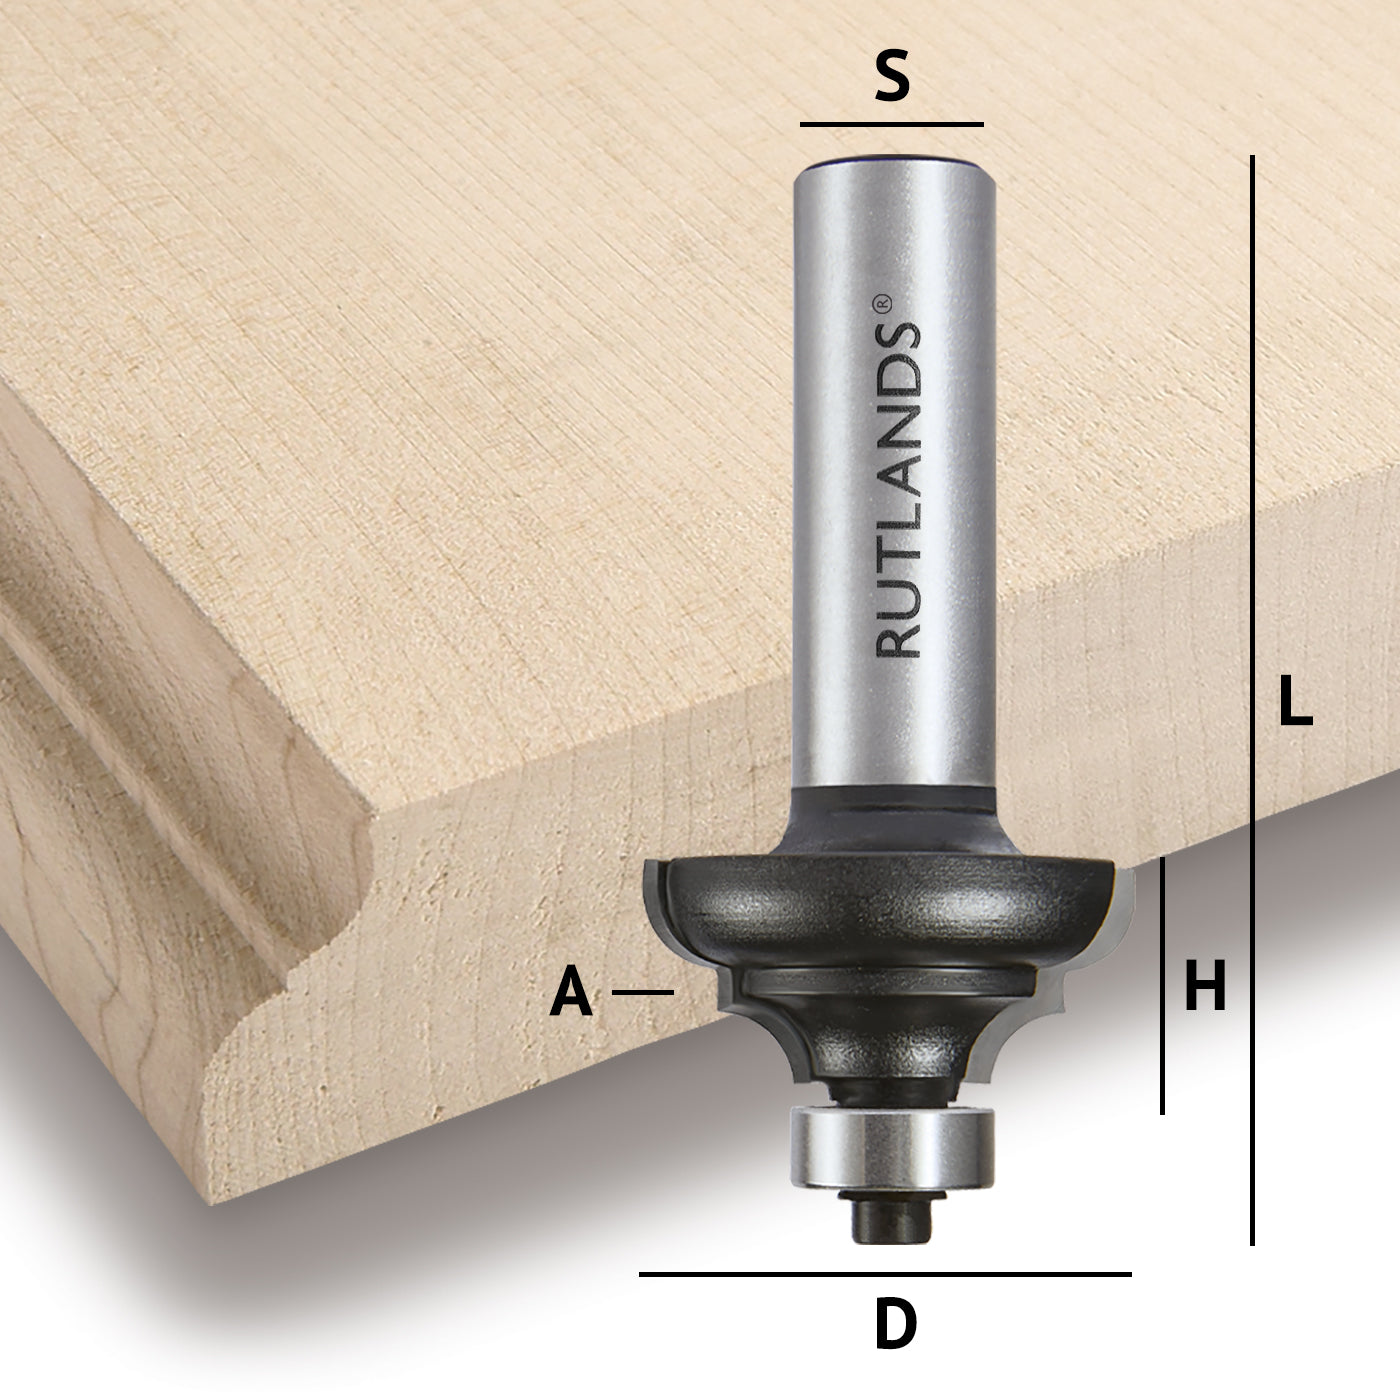 Router Bit - Classical Ogee 